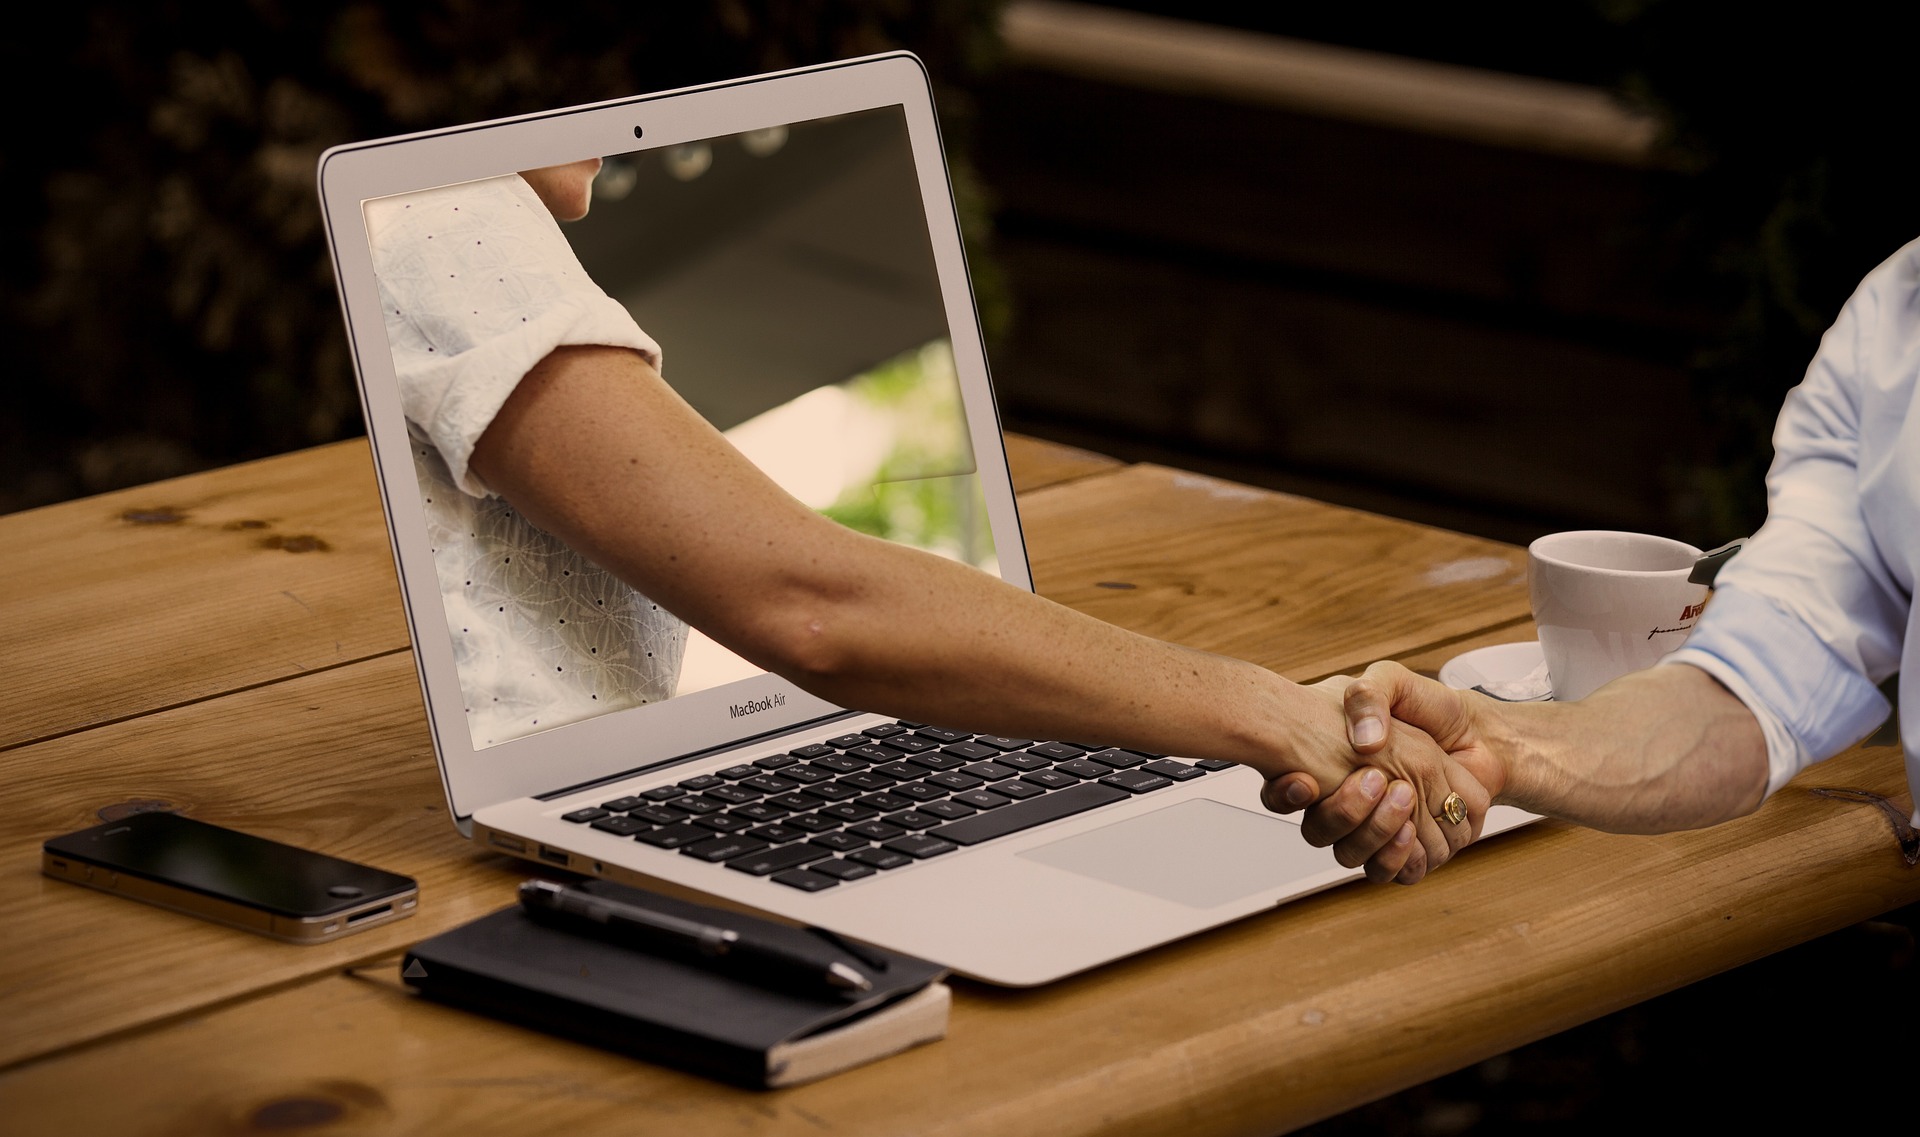 two people shaking hands through a laptop screen